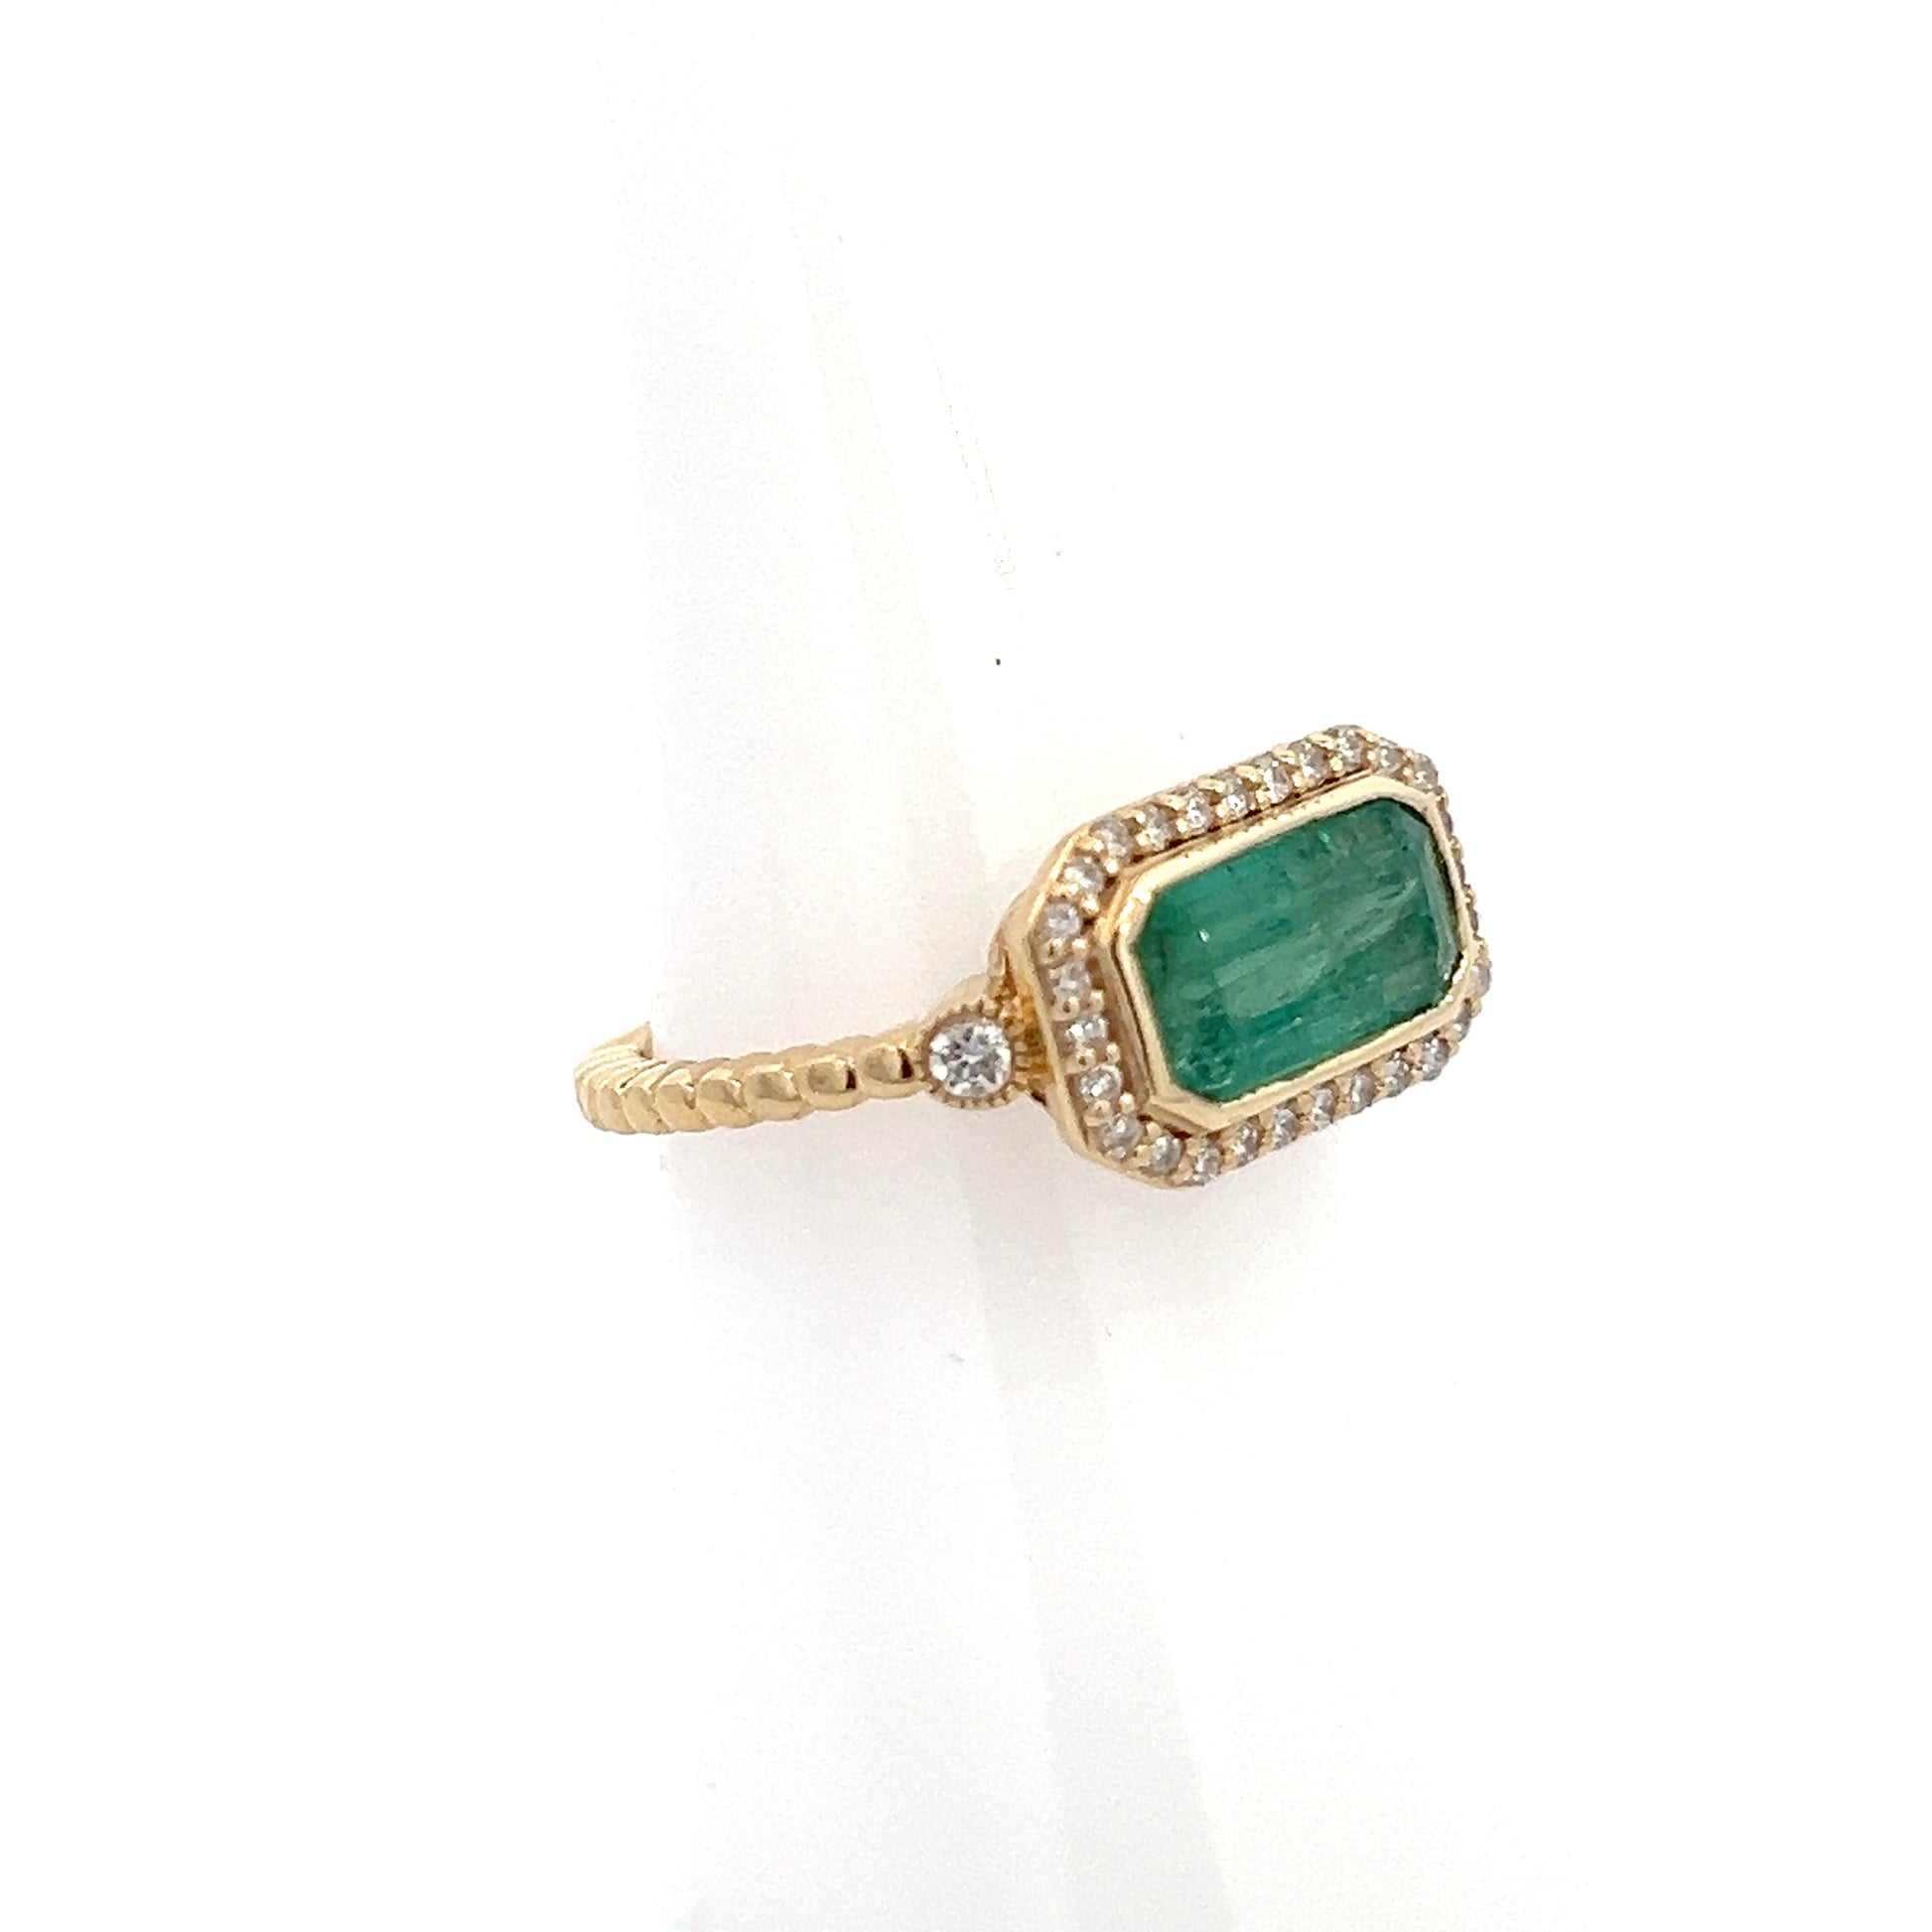 Natural Emerald and Diamond Ring 6.5 14k Y Gold 2.32 TCW Certified $4,950 310644 - Certified Fine Jewelry